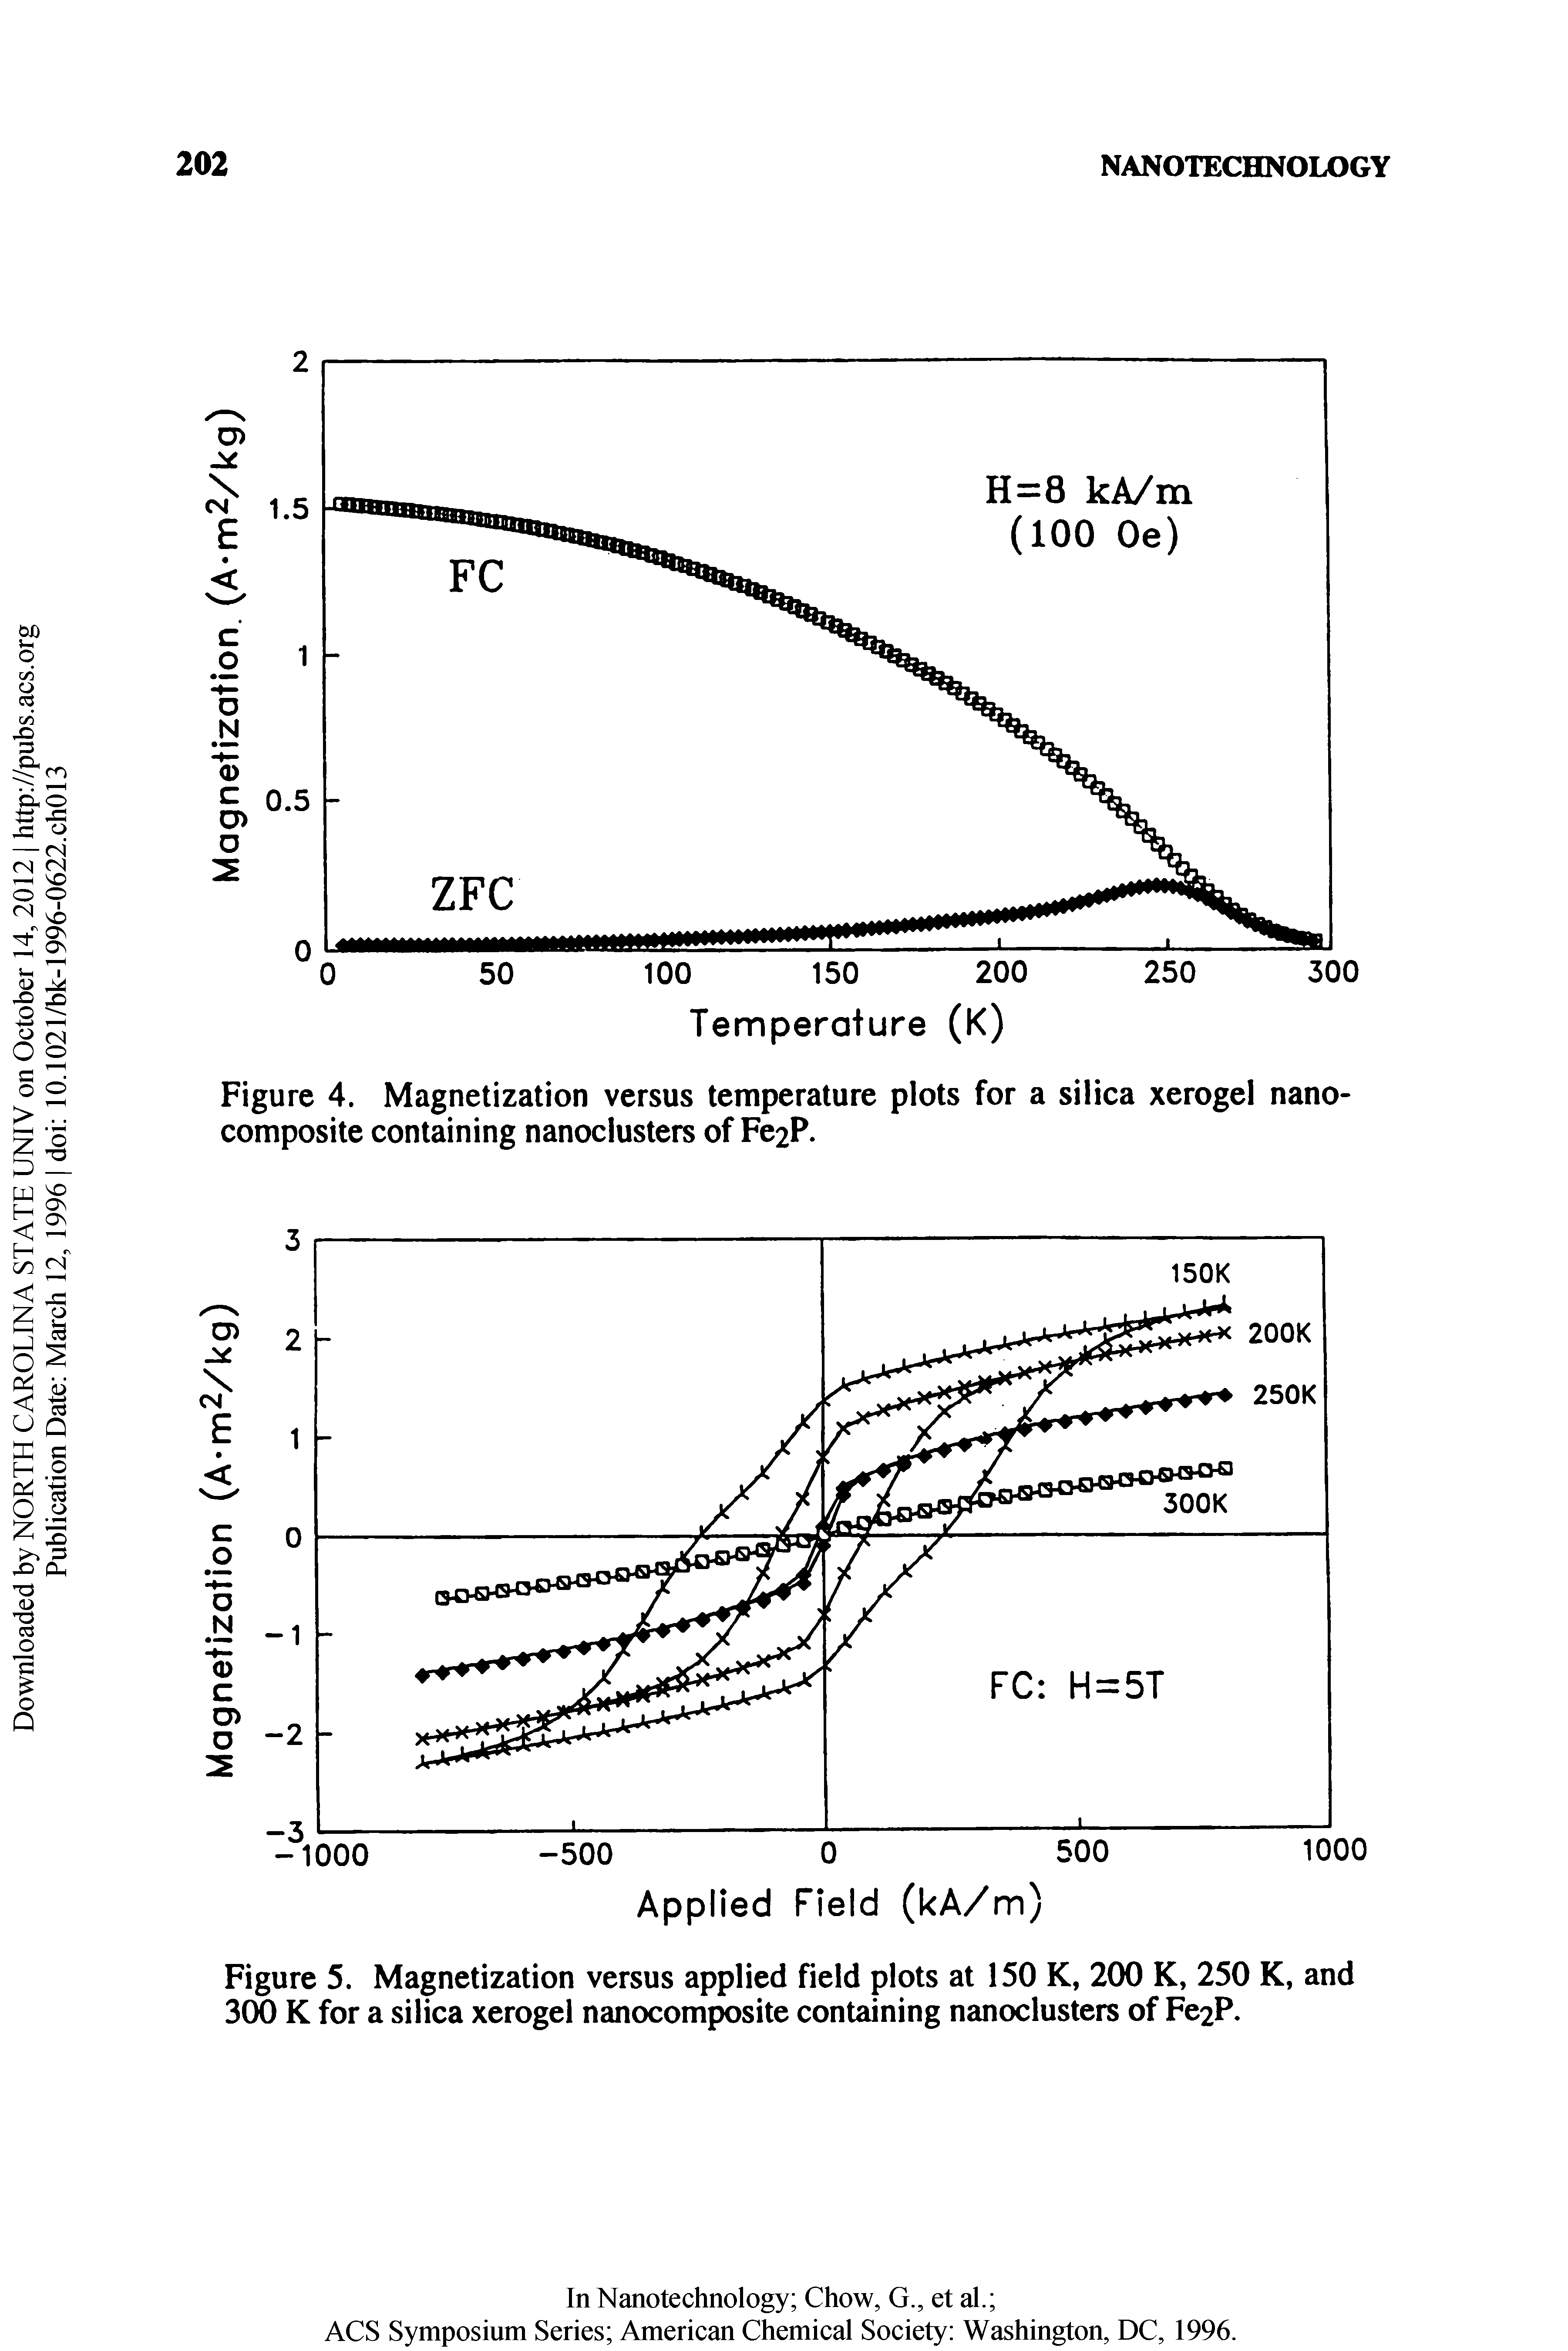 Figure 5. Magnetization versus applied field plots at 150 K, 200 K, 250 K, and 300 K for a silica xerogel nanocomposite containing nanoclusters of Fe2P.